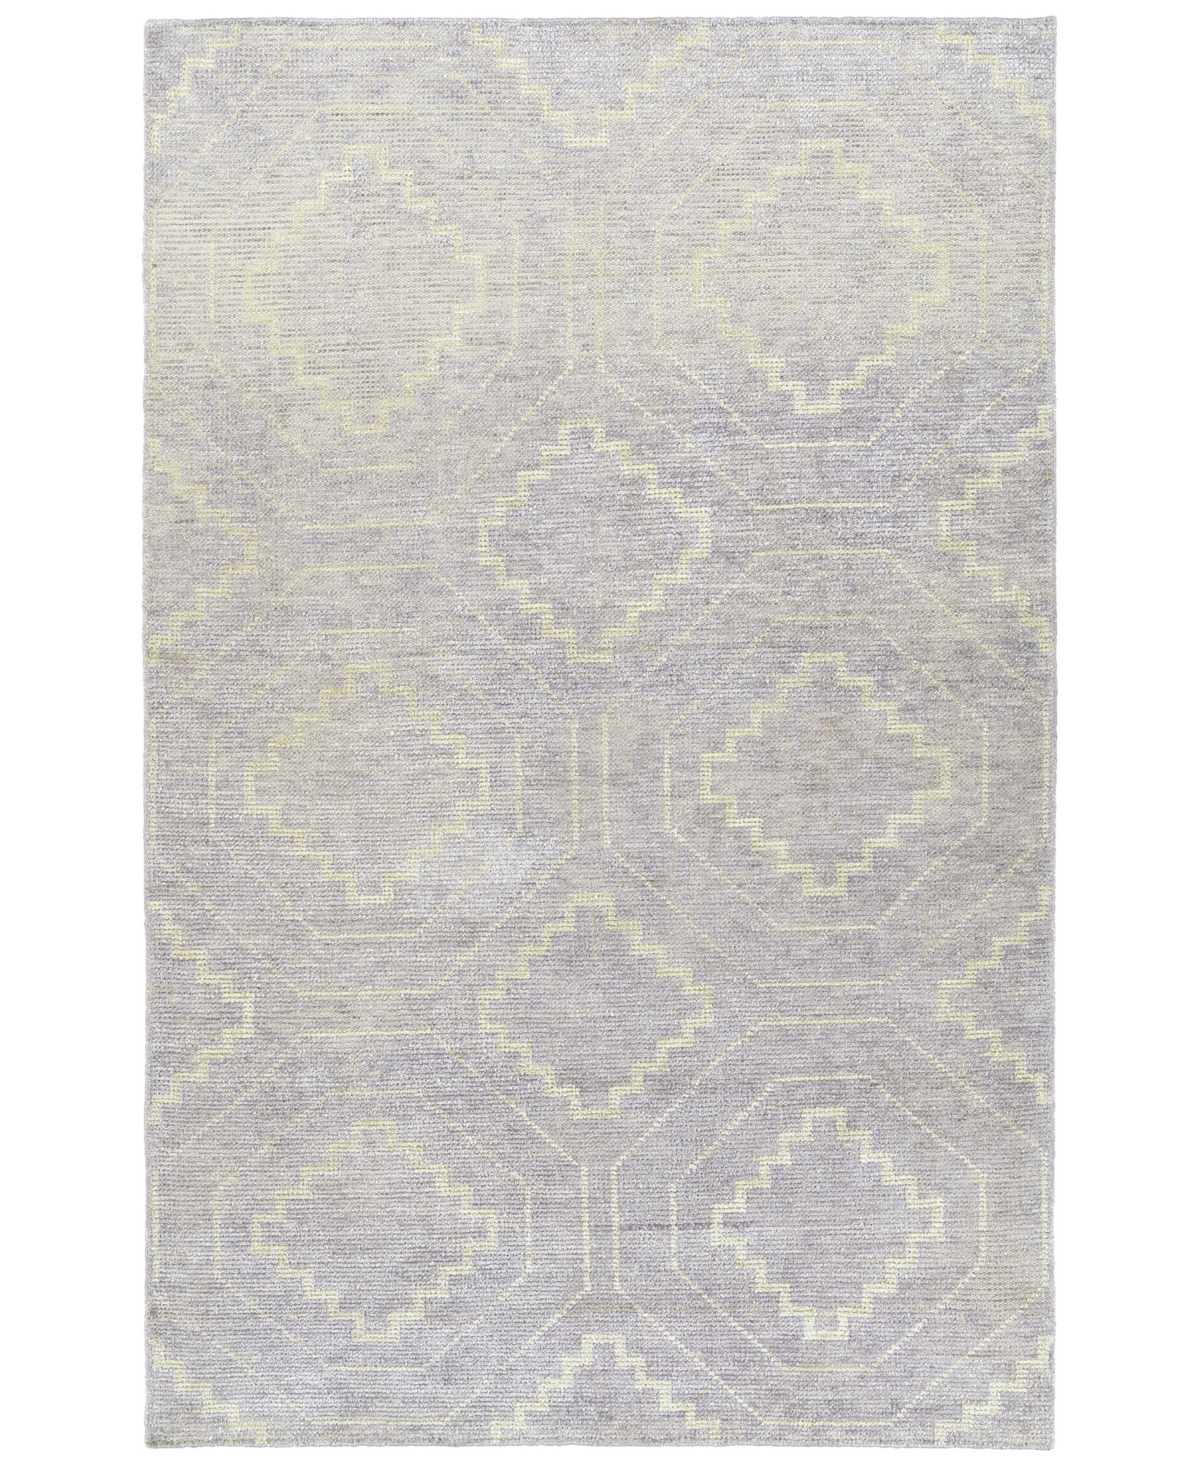 Kaleen Solitaire Sol13-20 Lavender 4 'x 6' Area Rug